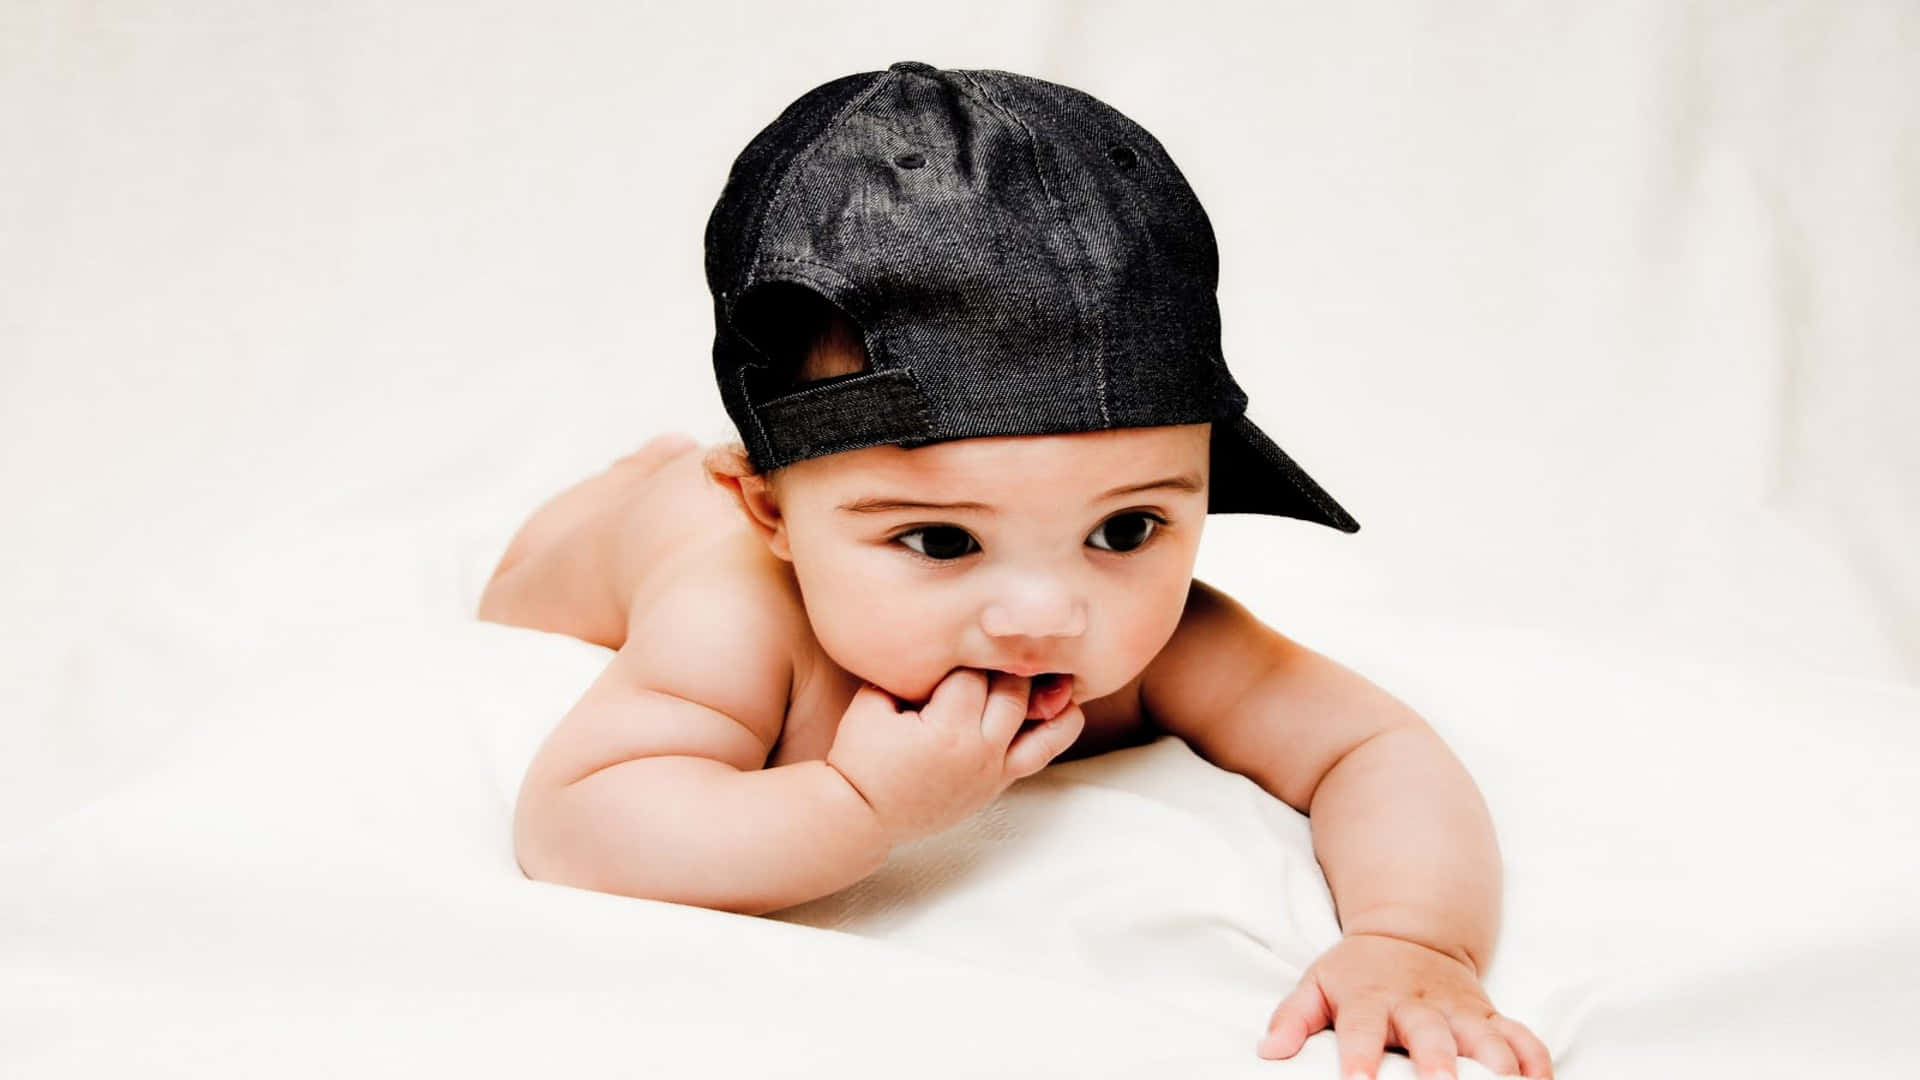 Baby Boy With A Black Cap Background